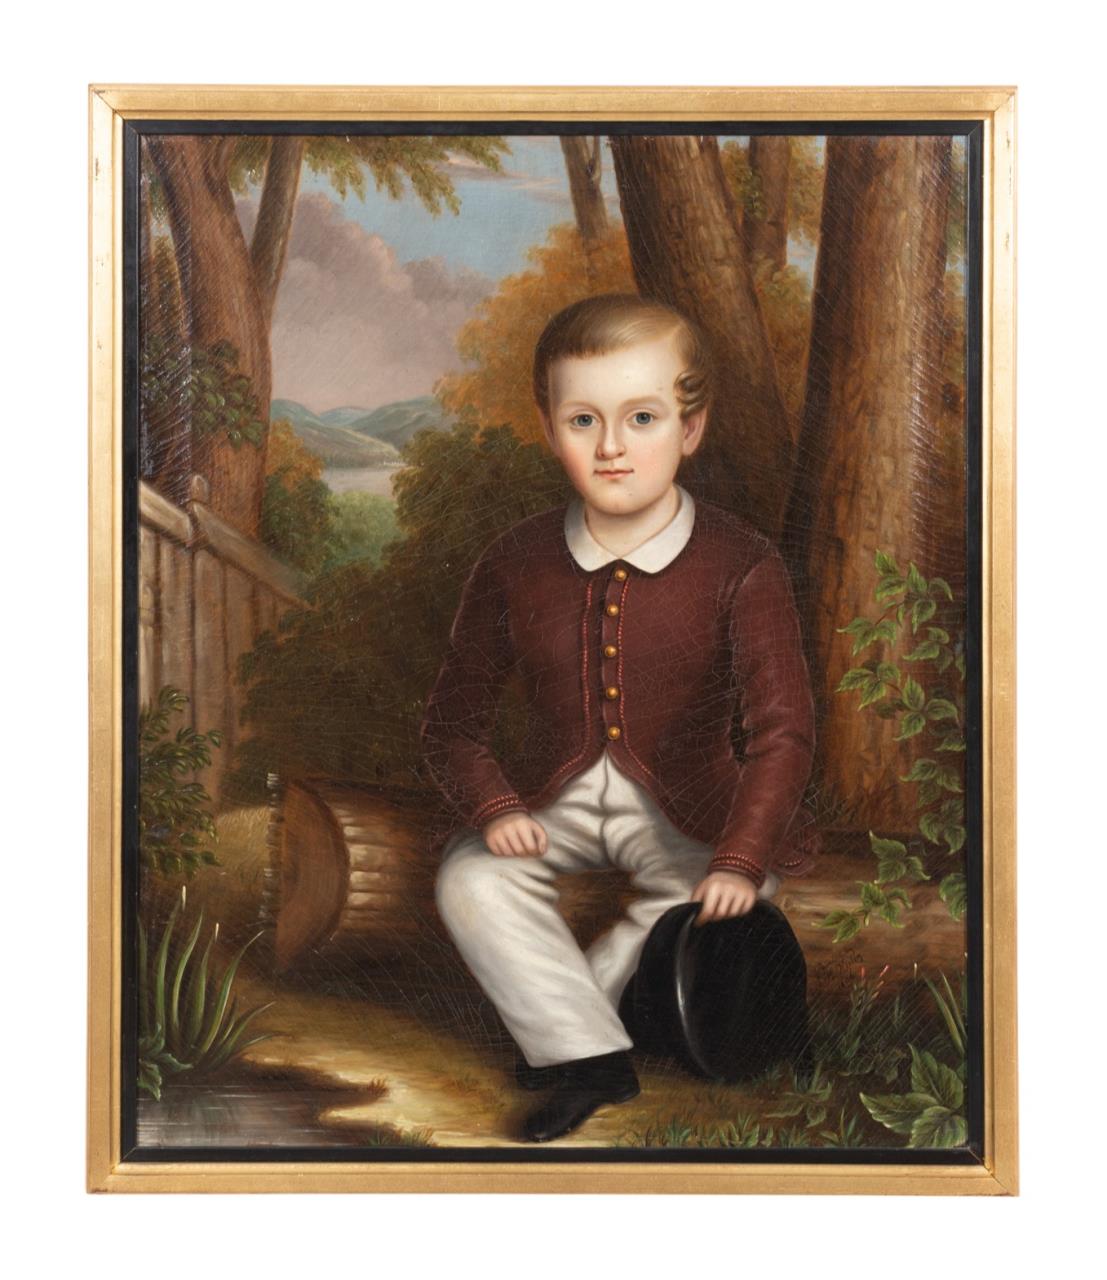 ISAAC KEELEY PORTRAIT OF A YOUNG 2f9647